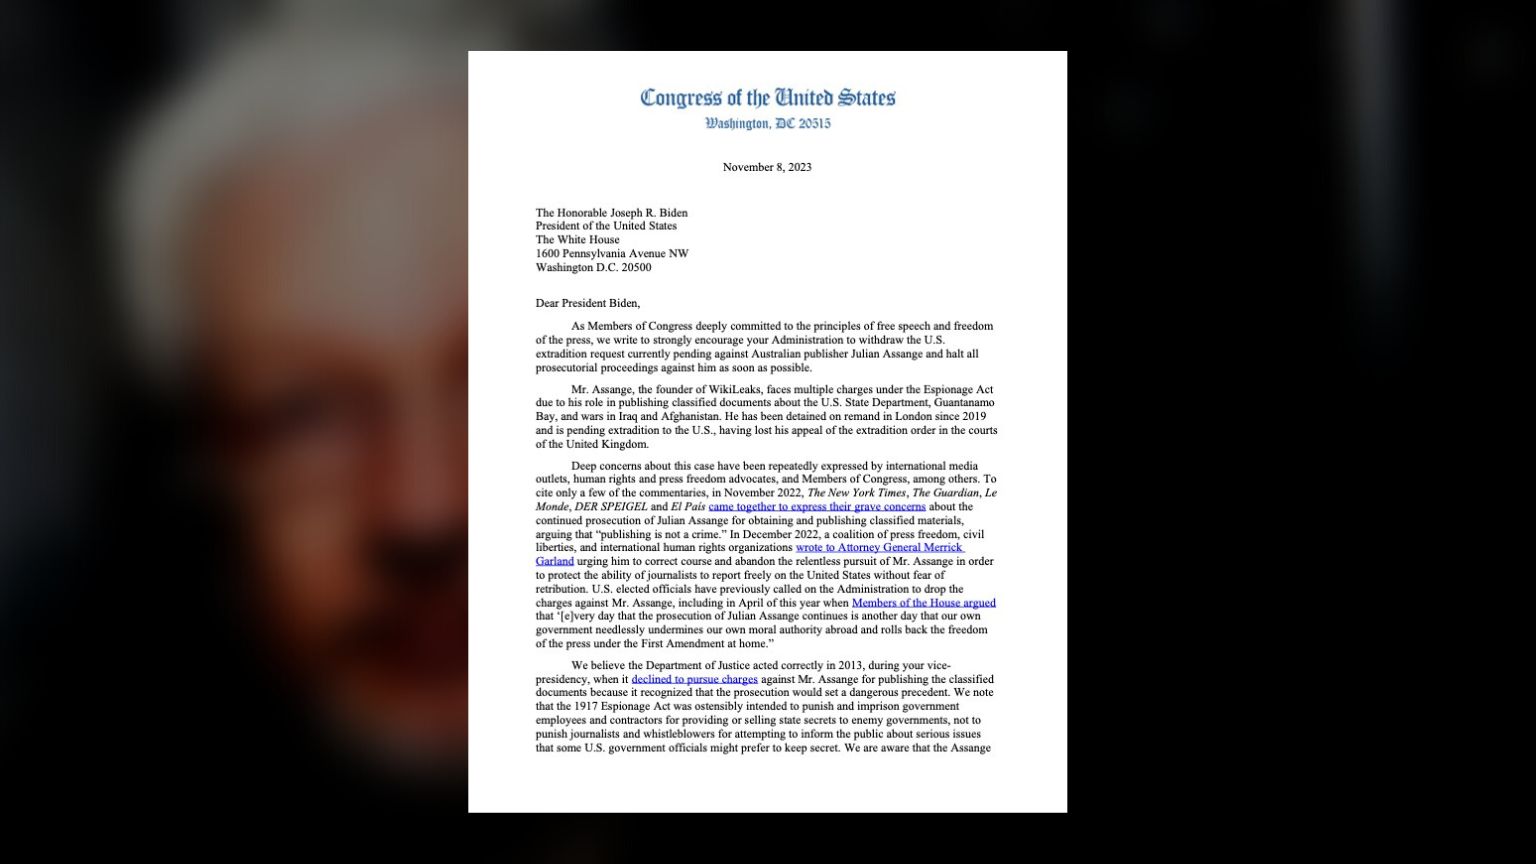 Bipartisan Letter Calls on Biden To Drop Charges Against Julian Assange